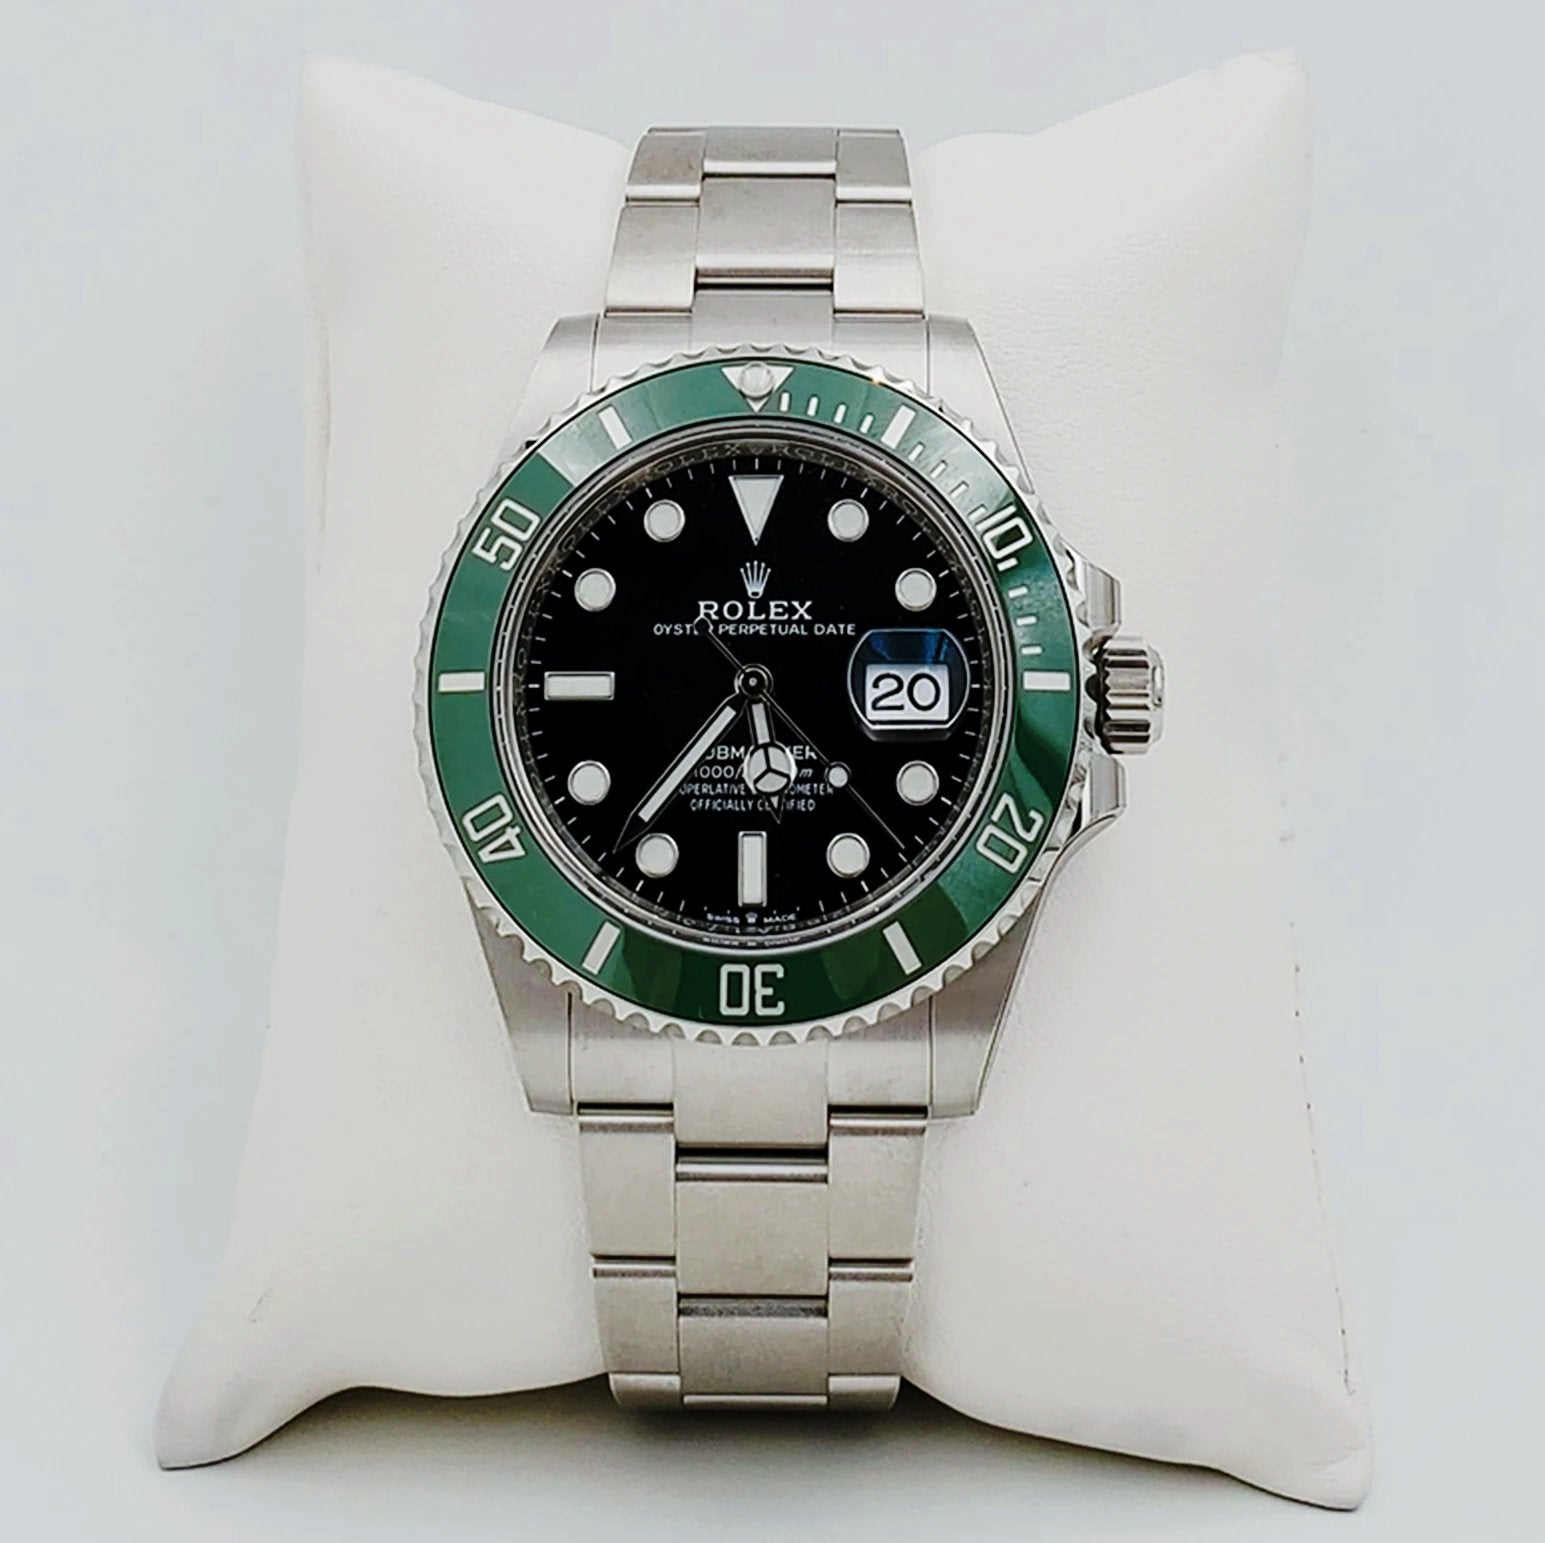 Men's Rolex 41mm Submariner Date Oyster Perpetual Stainless Steel Watch with Black Dial and Green Bezel. (NEW 126610LV)